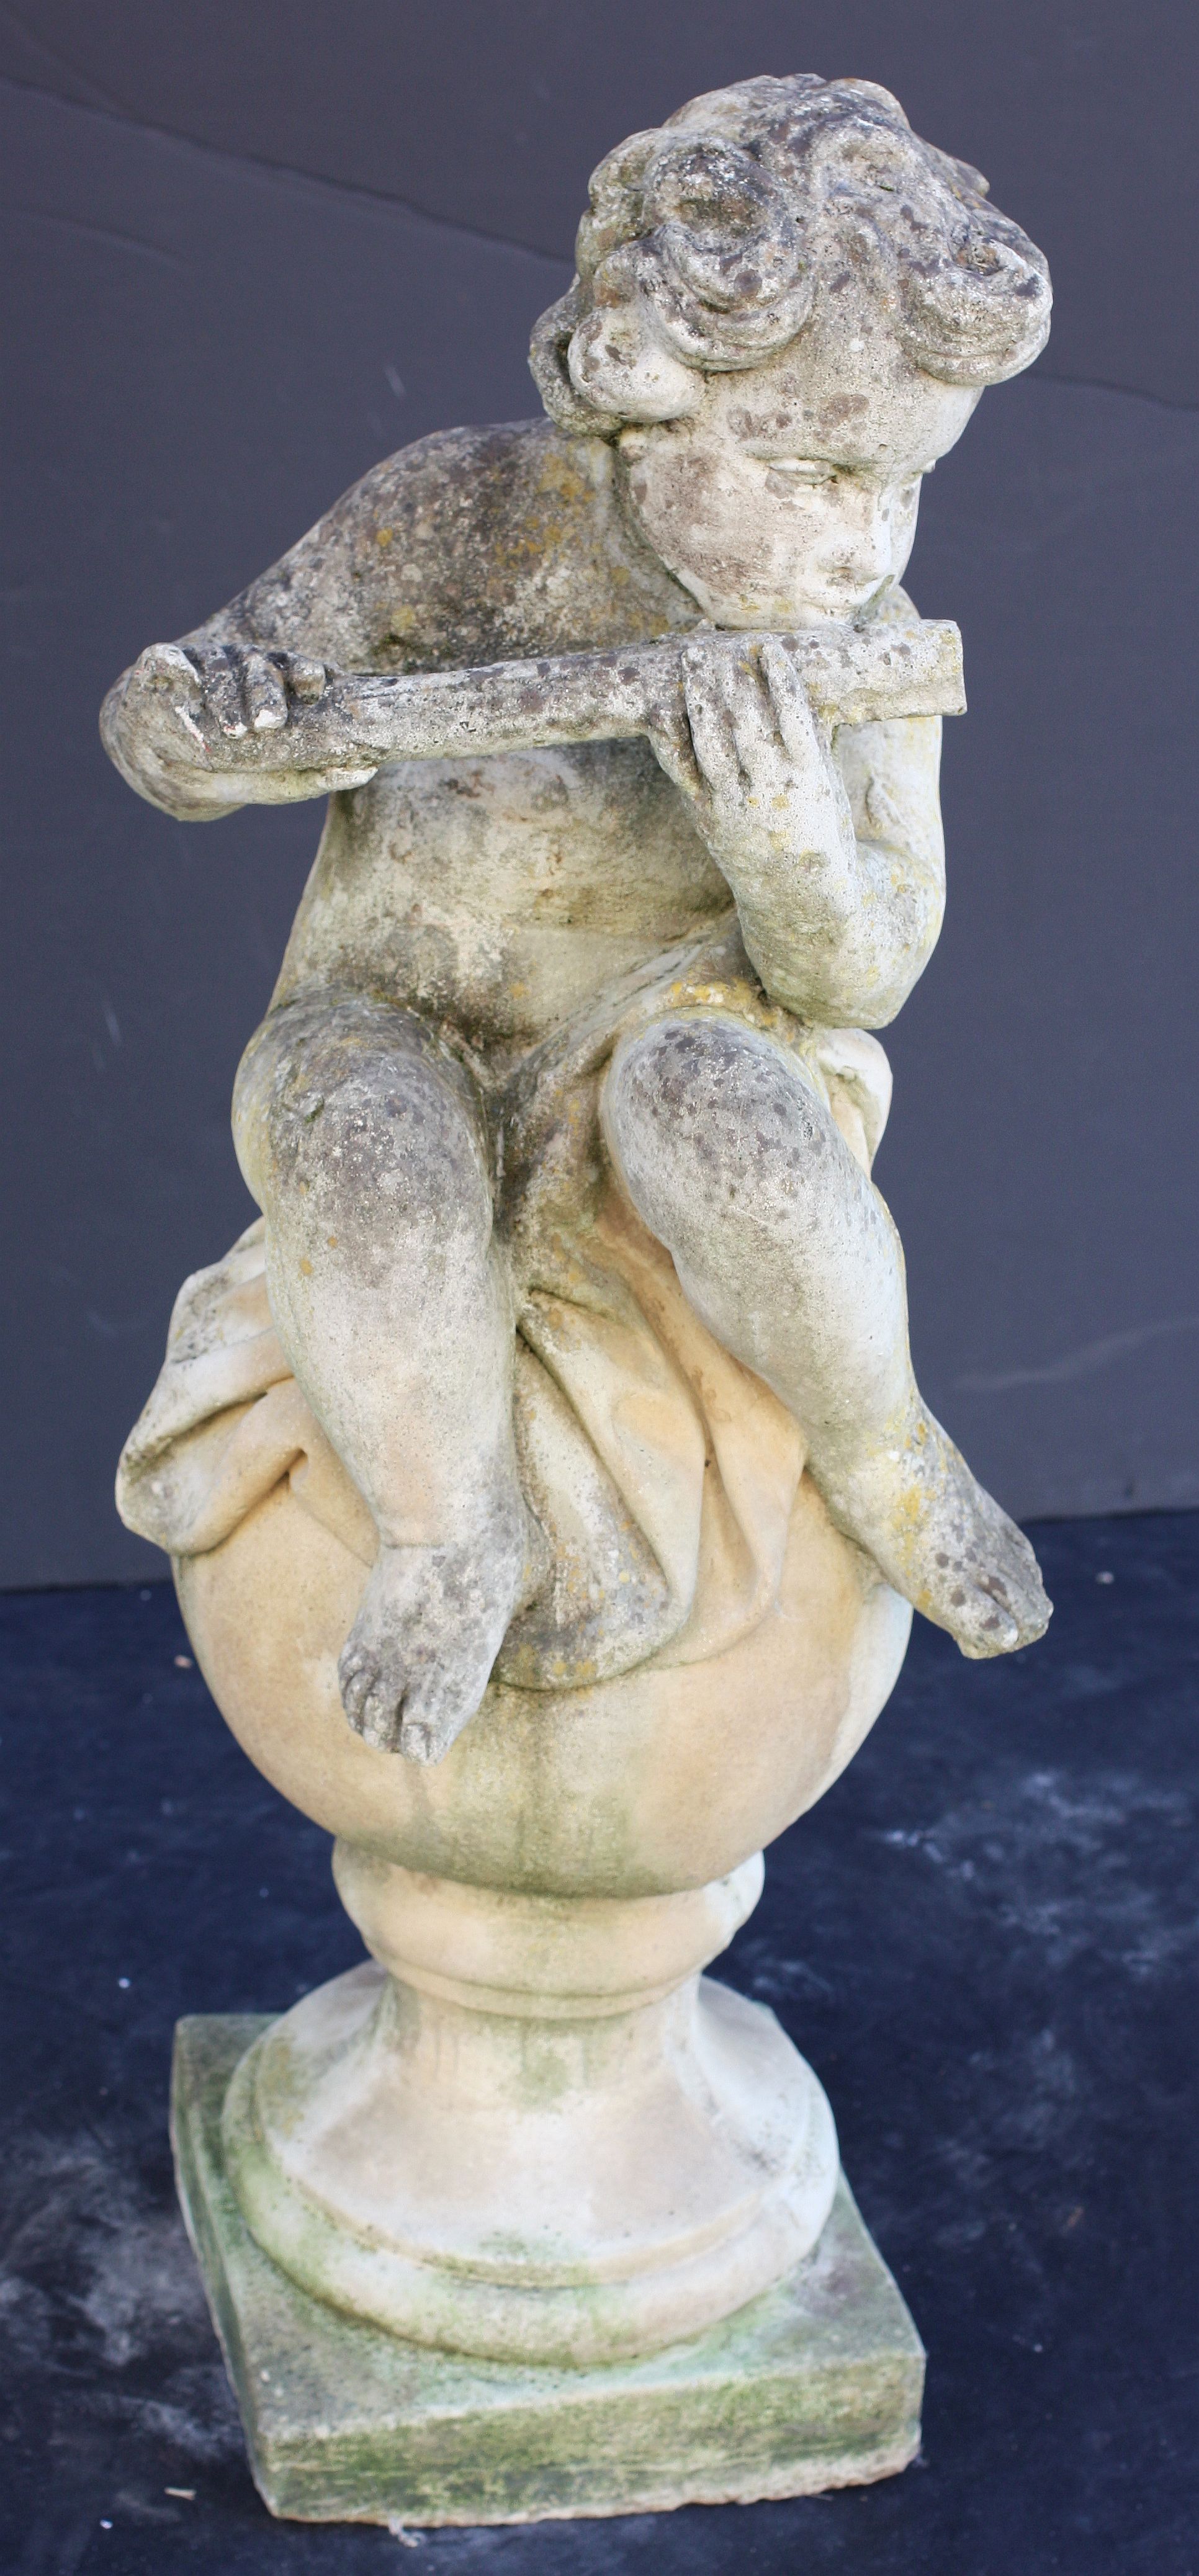 English Garden Stone Figure of a Child Playing Flute